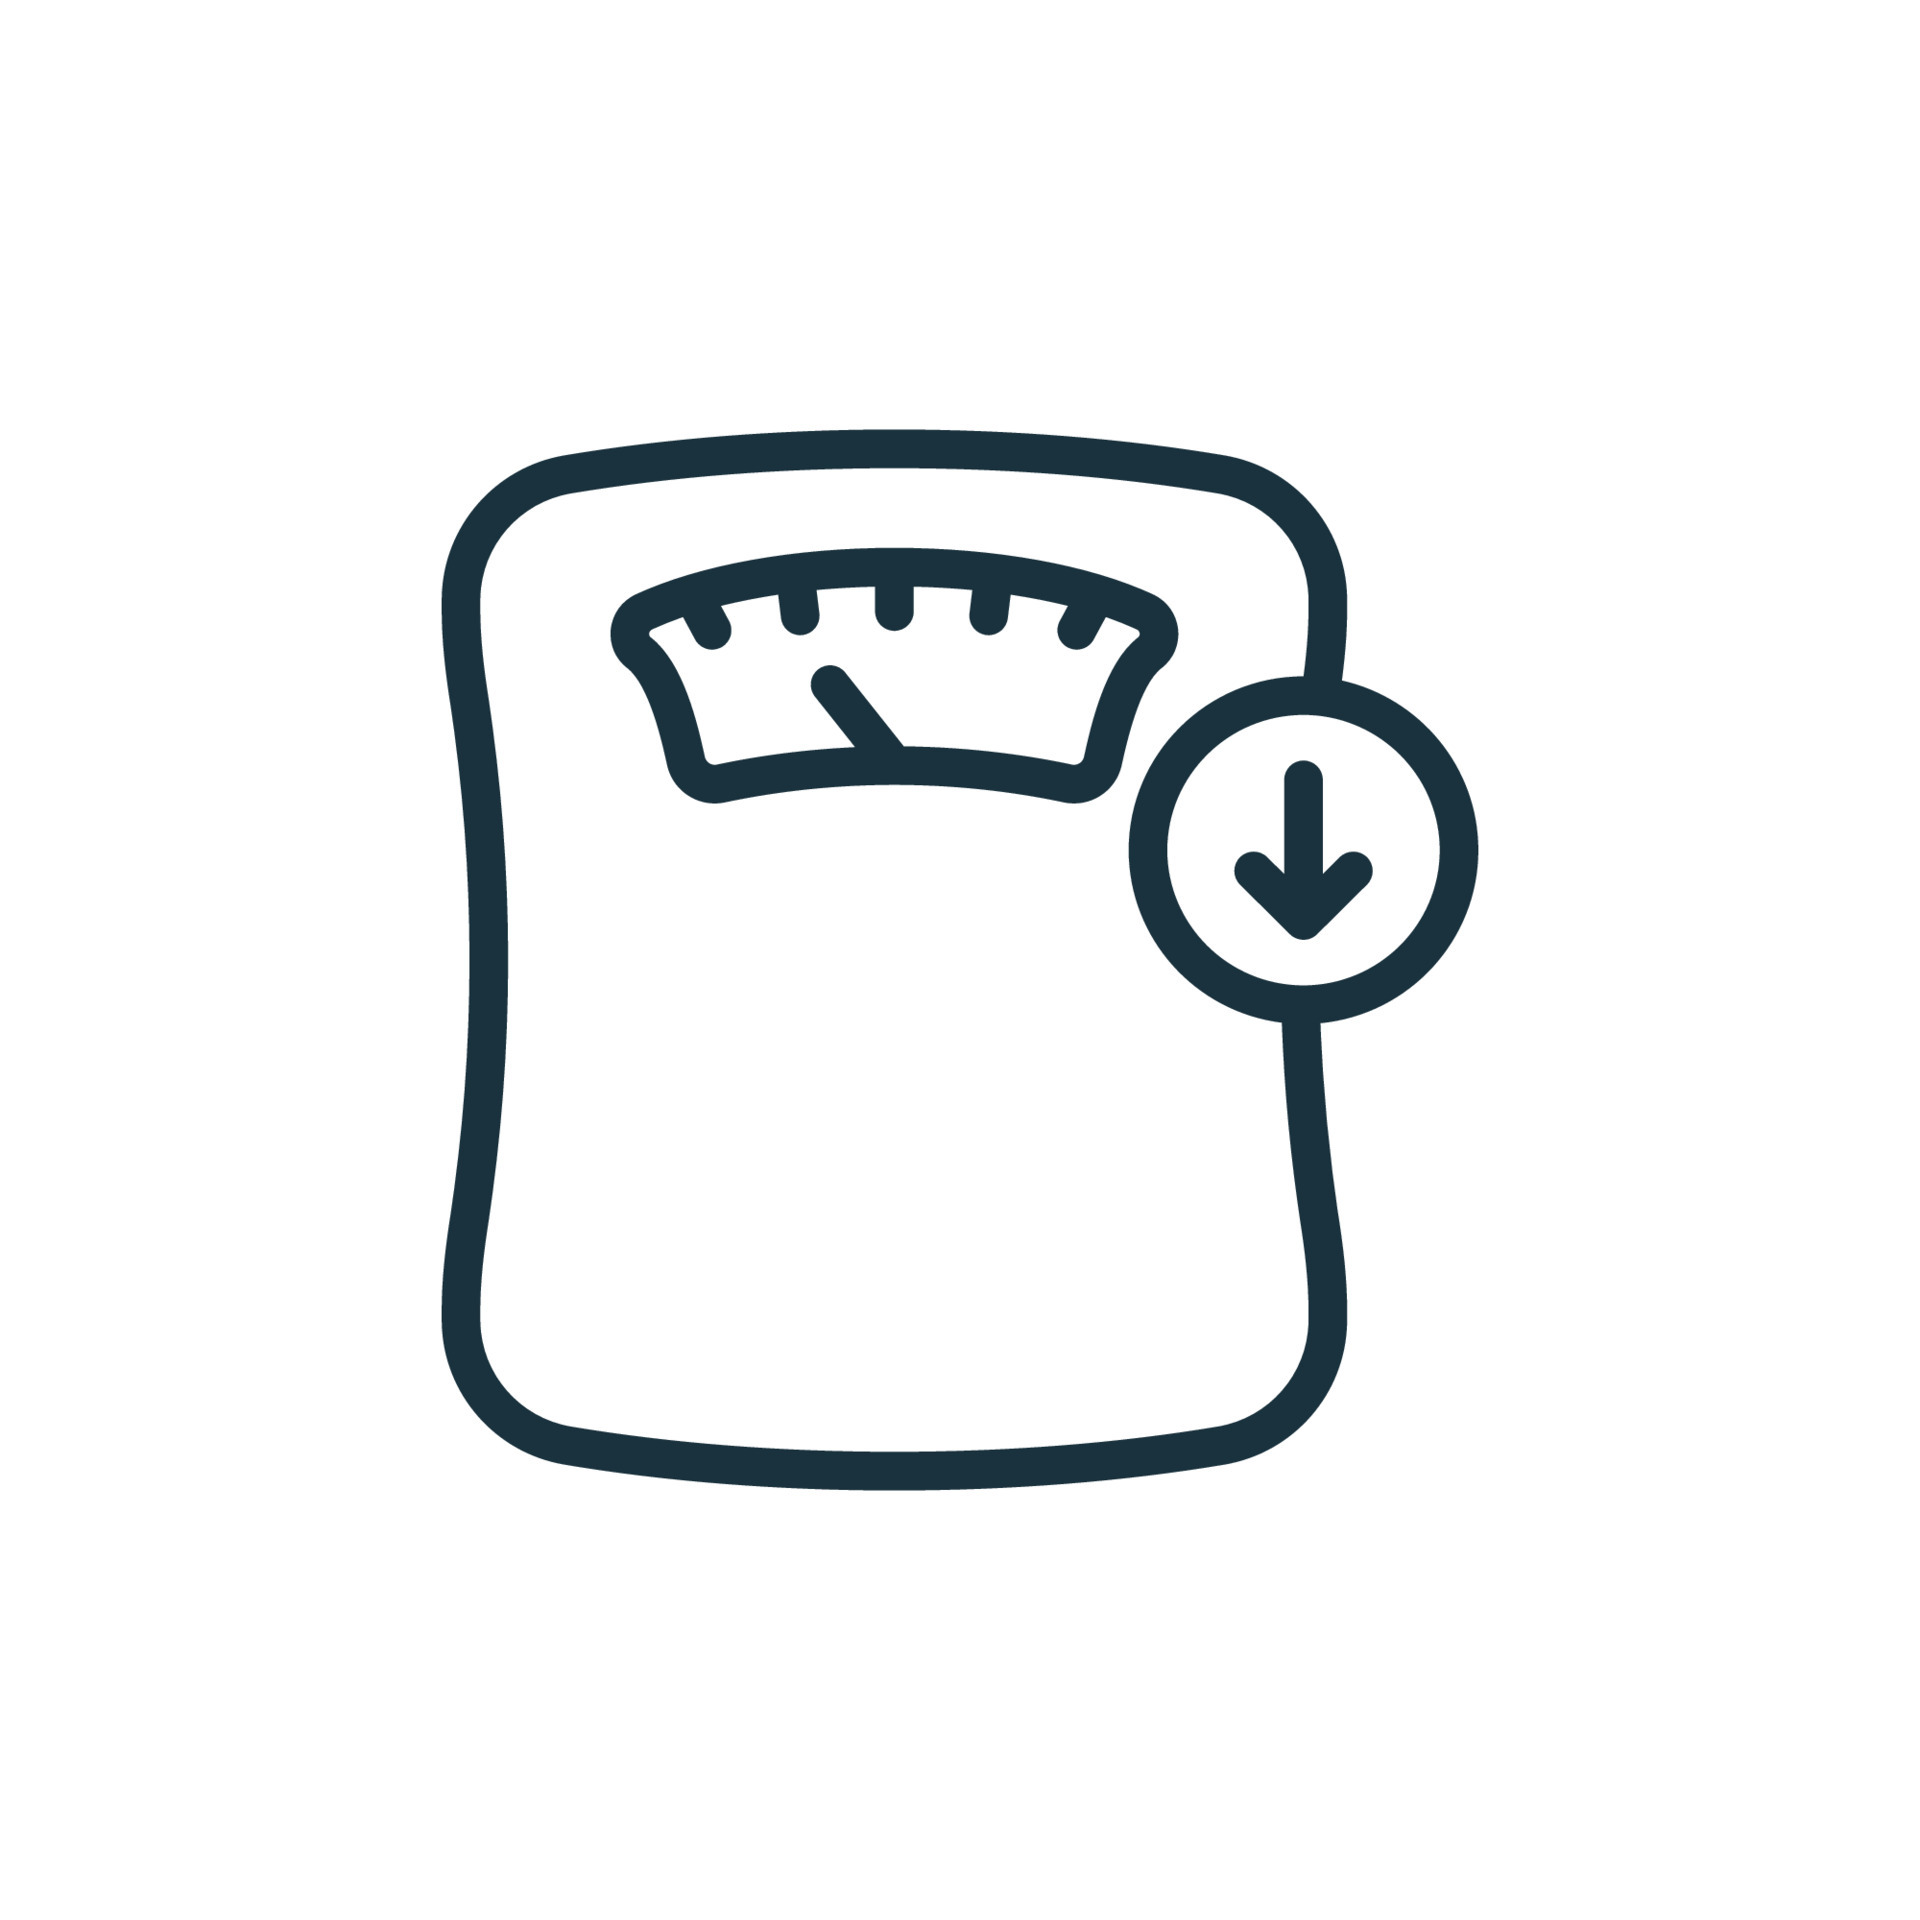 https://static.vecteezy.com/system/resources/previews/005/725/346/original/weighing-machine-line-icon-weight-loss-concept-weight-control-concept-linear-pictogram-bathroom-floor-scales-outline-icon-isolated-illustration-vector.jpg